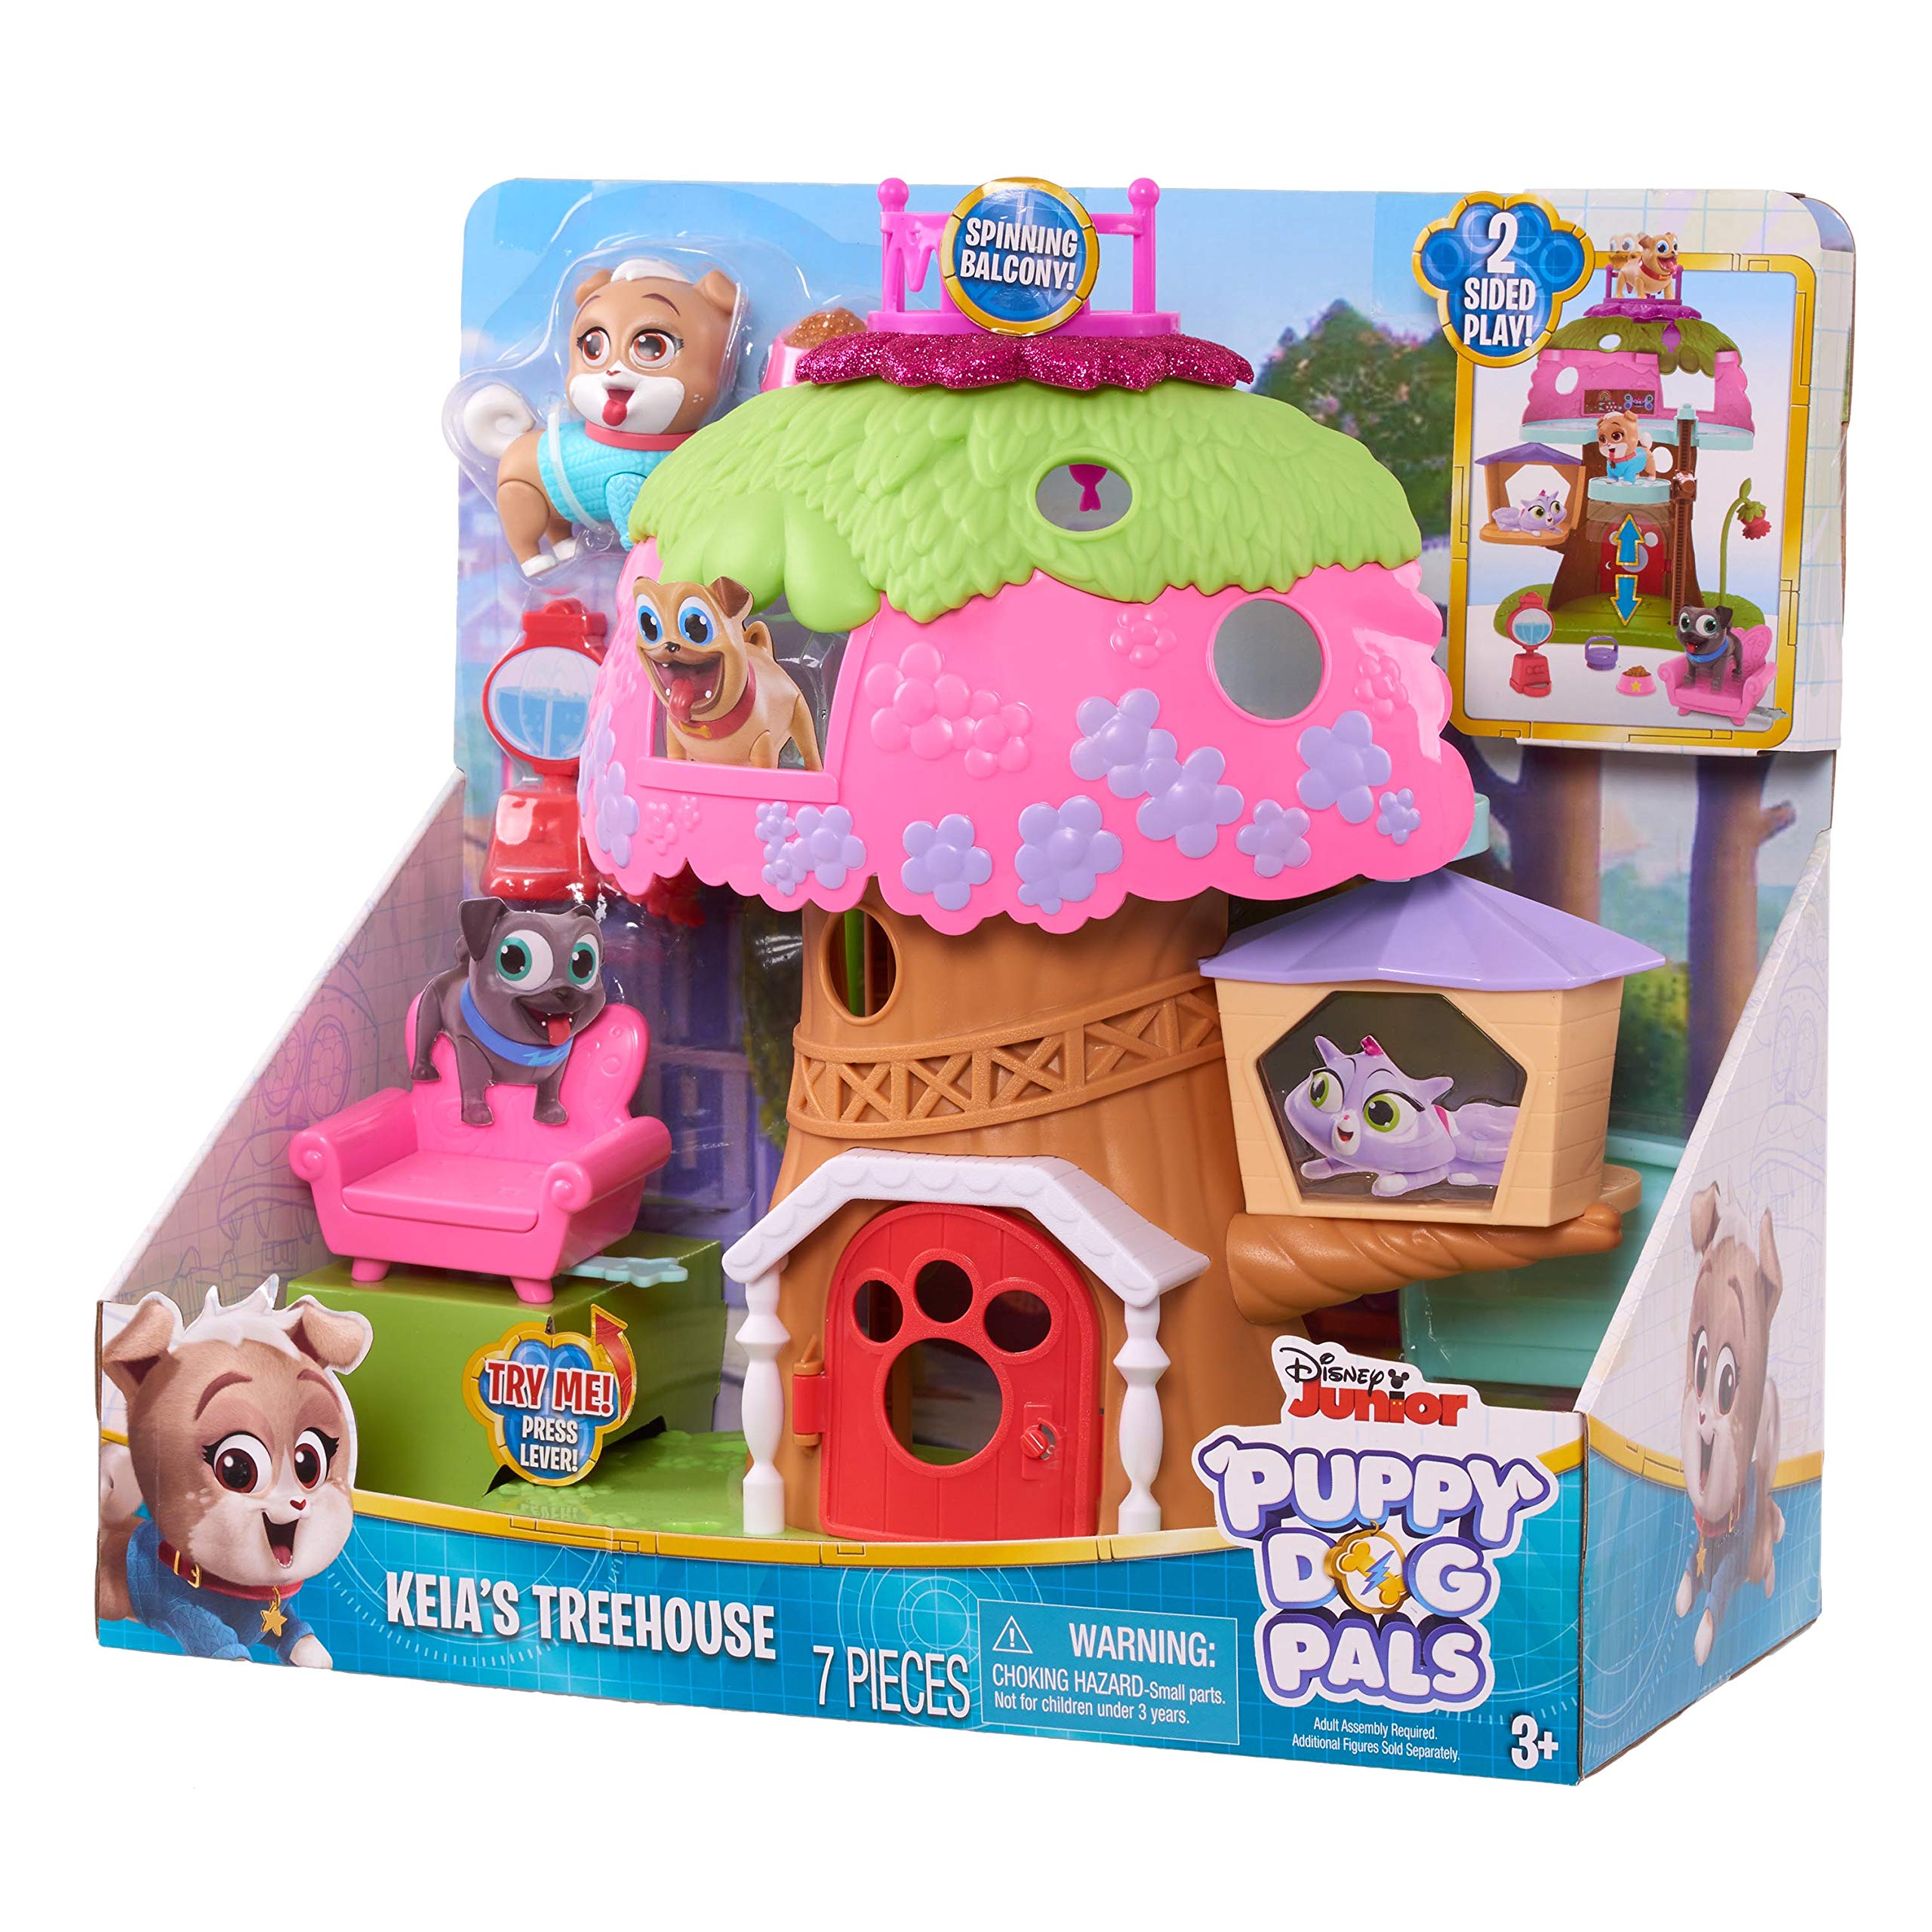 7-Pc Just Play Puppy Dog Pals Keia's Treehouse 2-Sided Playset $12.60 + Free Shipping w/ Prime or on $25+